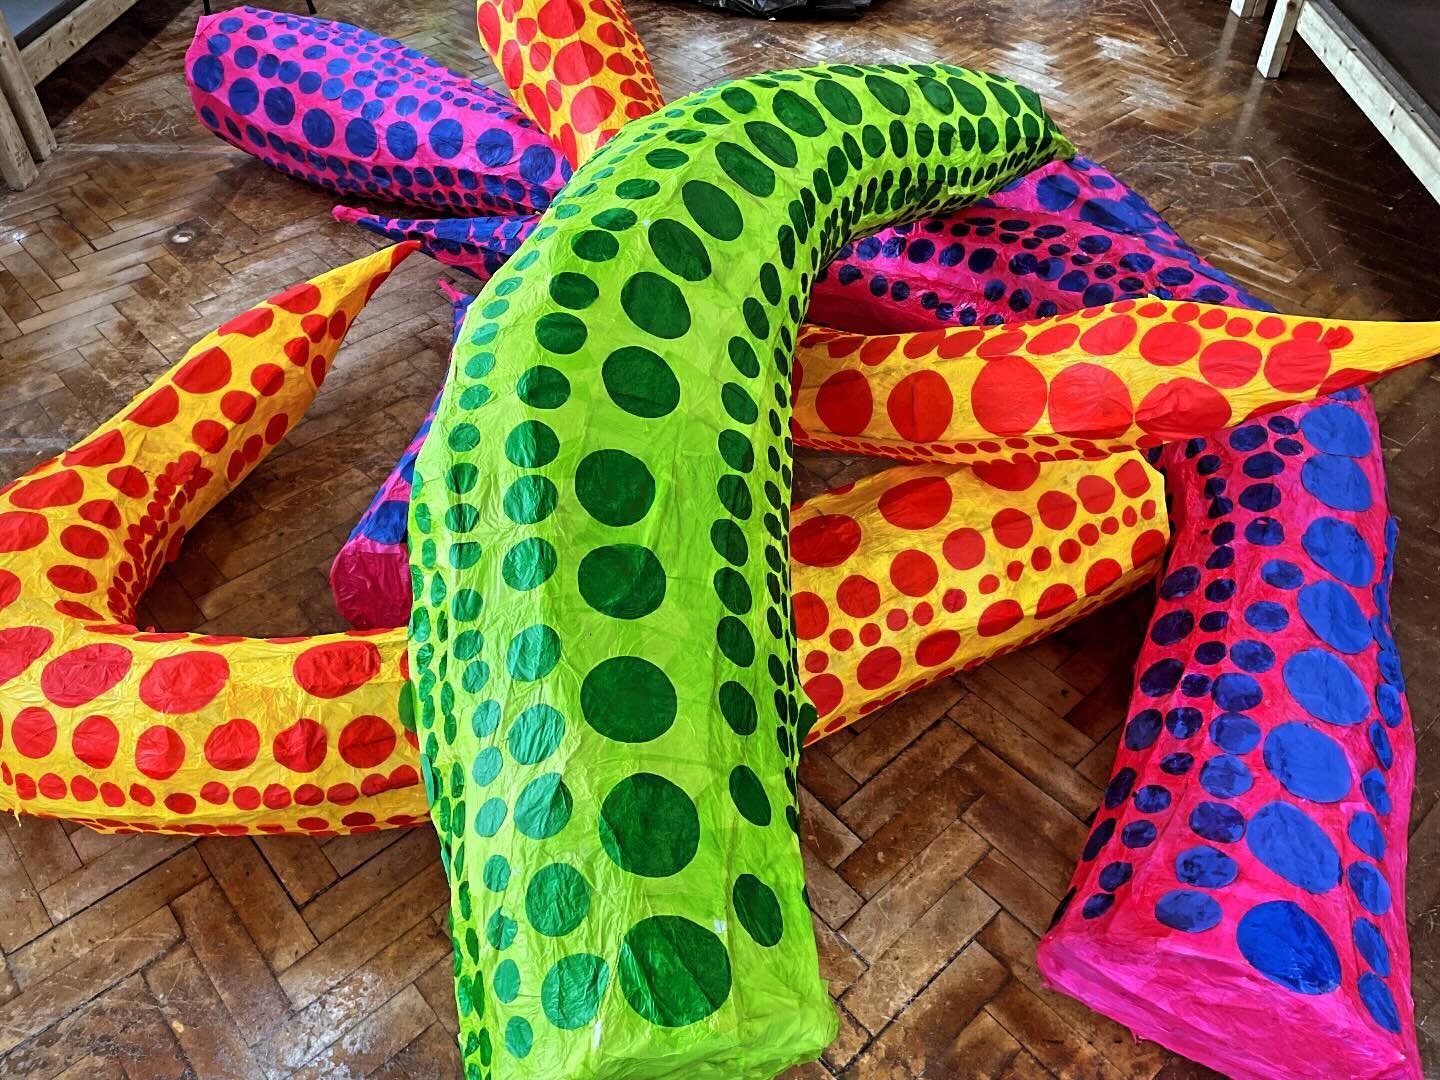 #yayoikusama inspired tentacles created today with some primary school pupils in haringey. Nice when the design side of my business crashes into the education side which are normally separate entities.